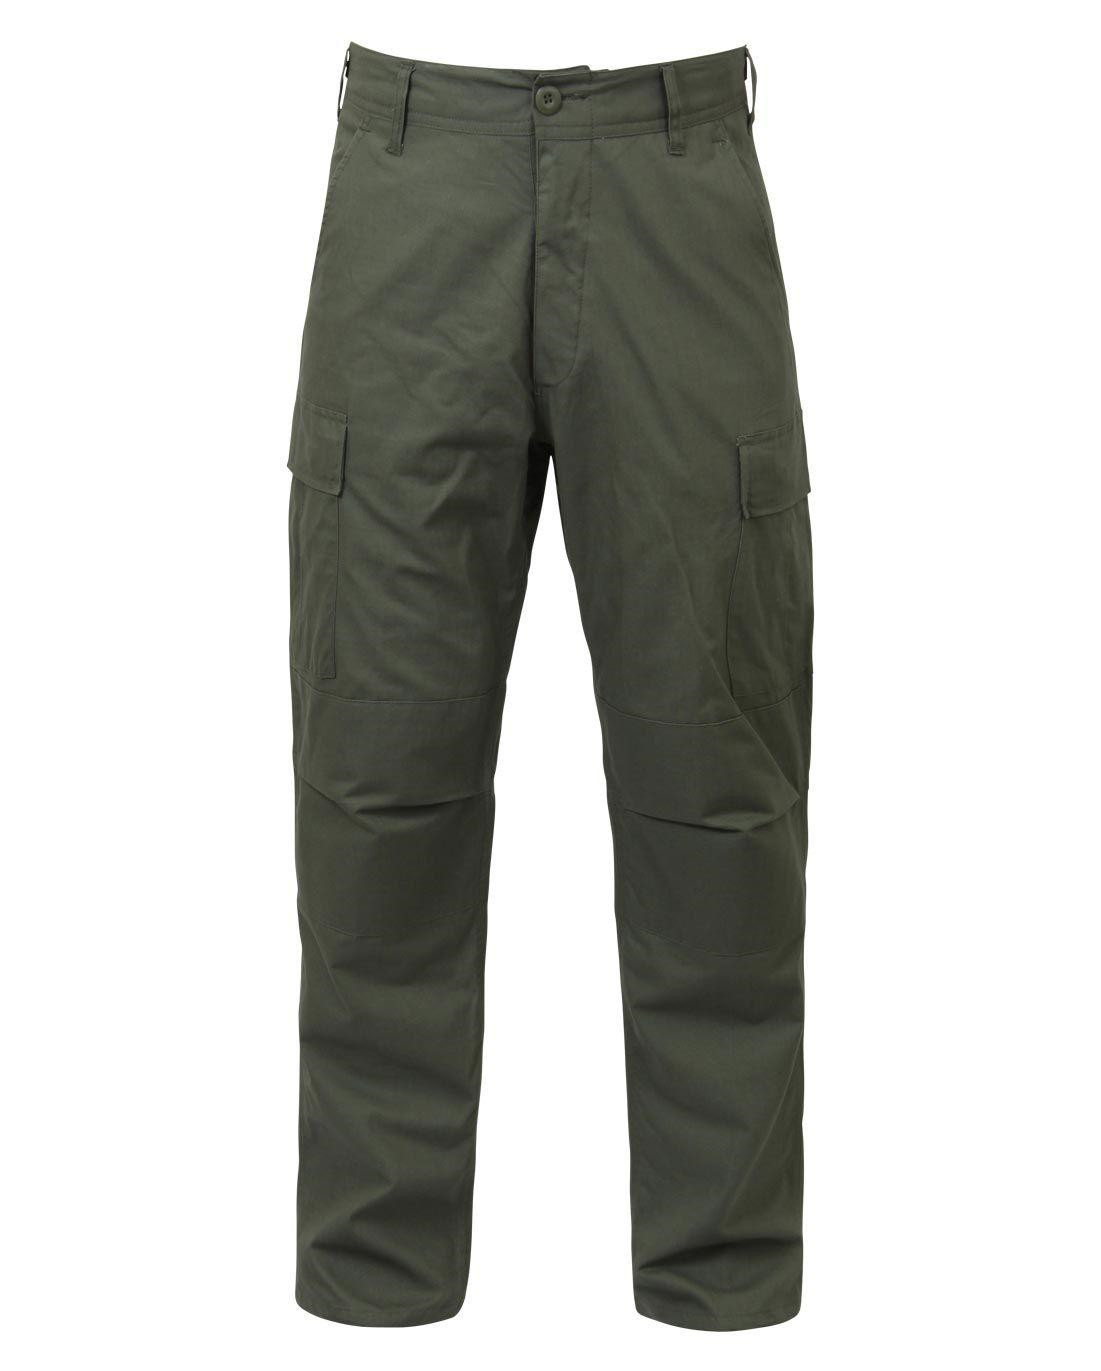 10: Rothco BDU Bukser i Rip-Stop (Oliven, Large / 35"-43")